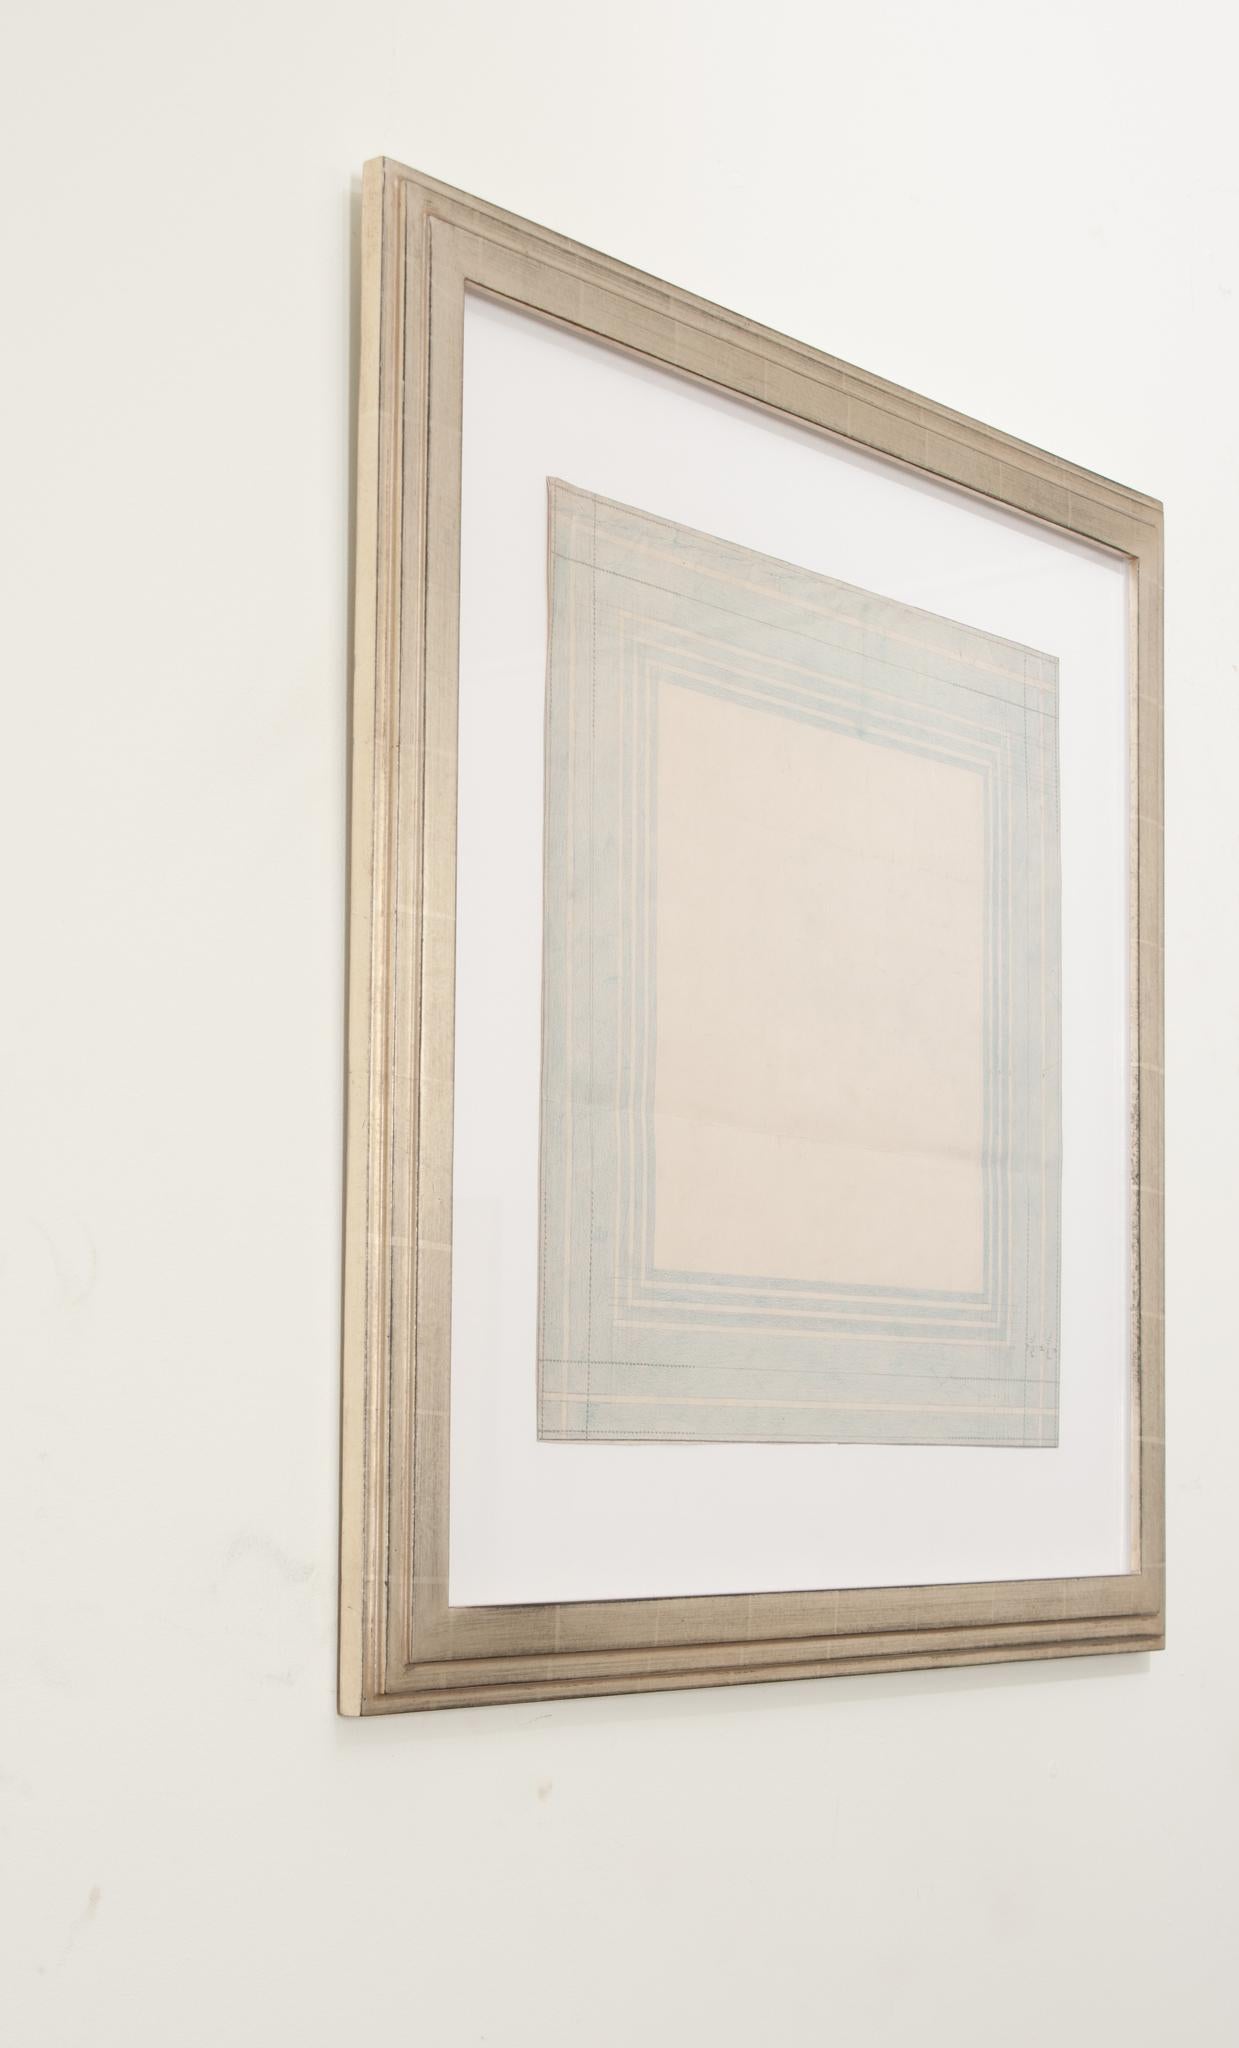 English Art Deco Drawing in Silver Gilt Frame 1